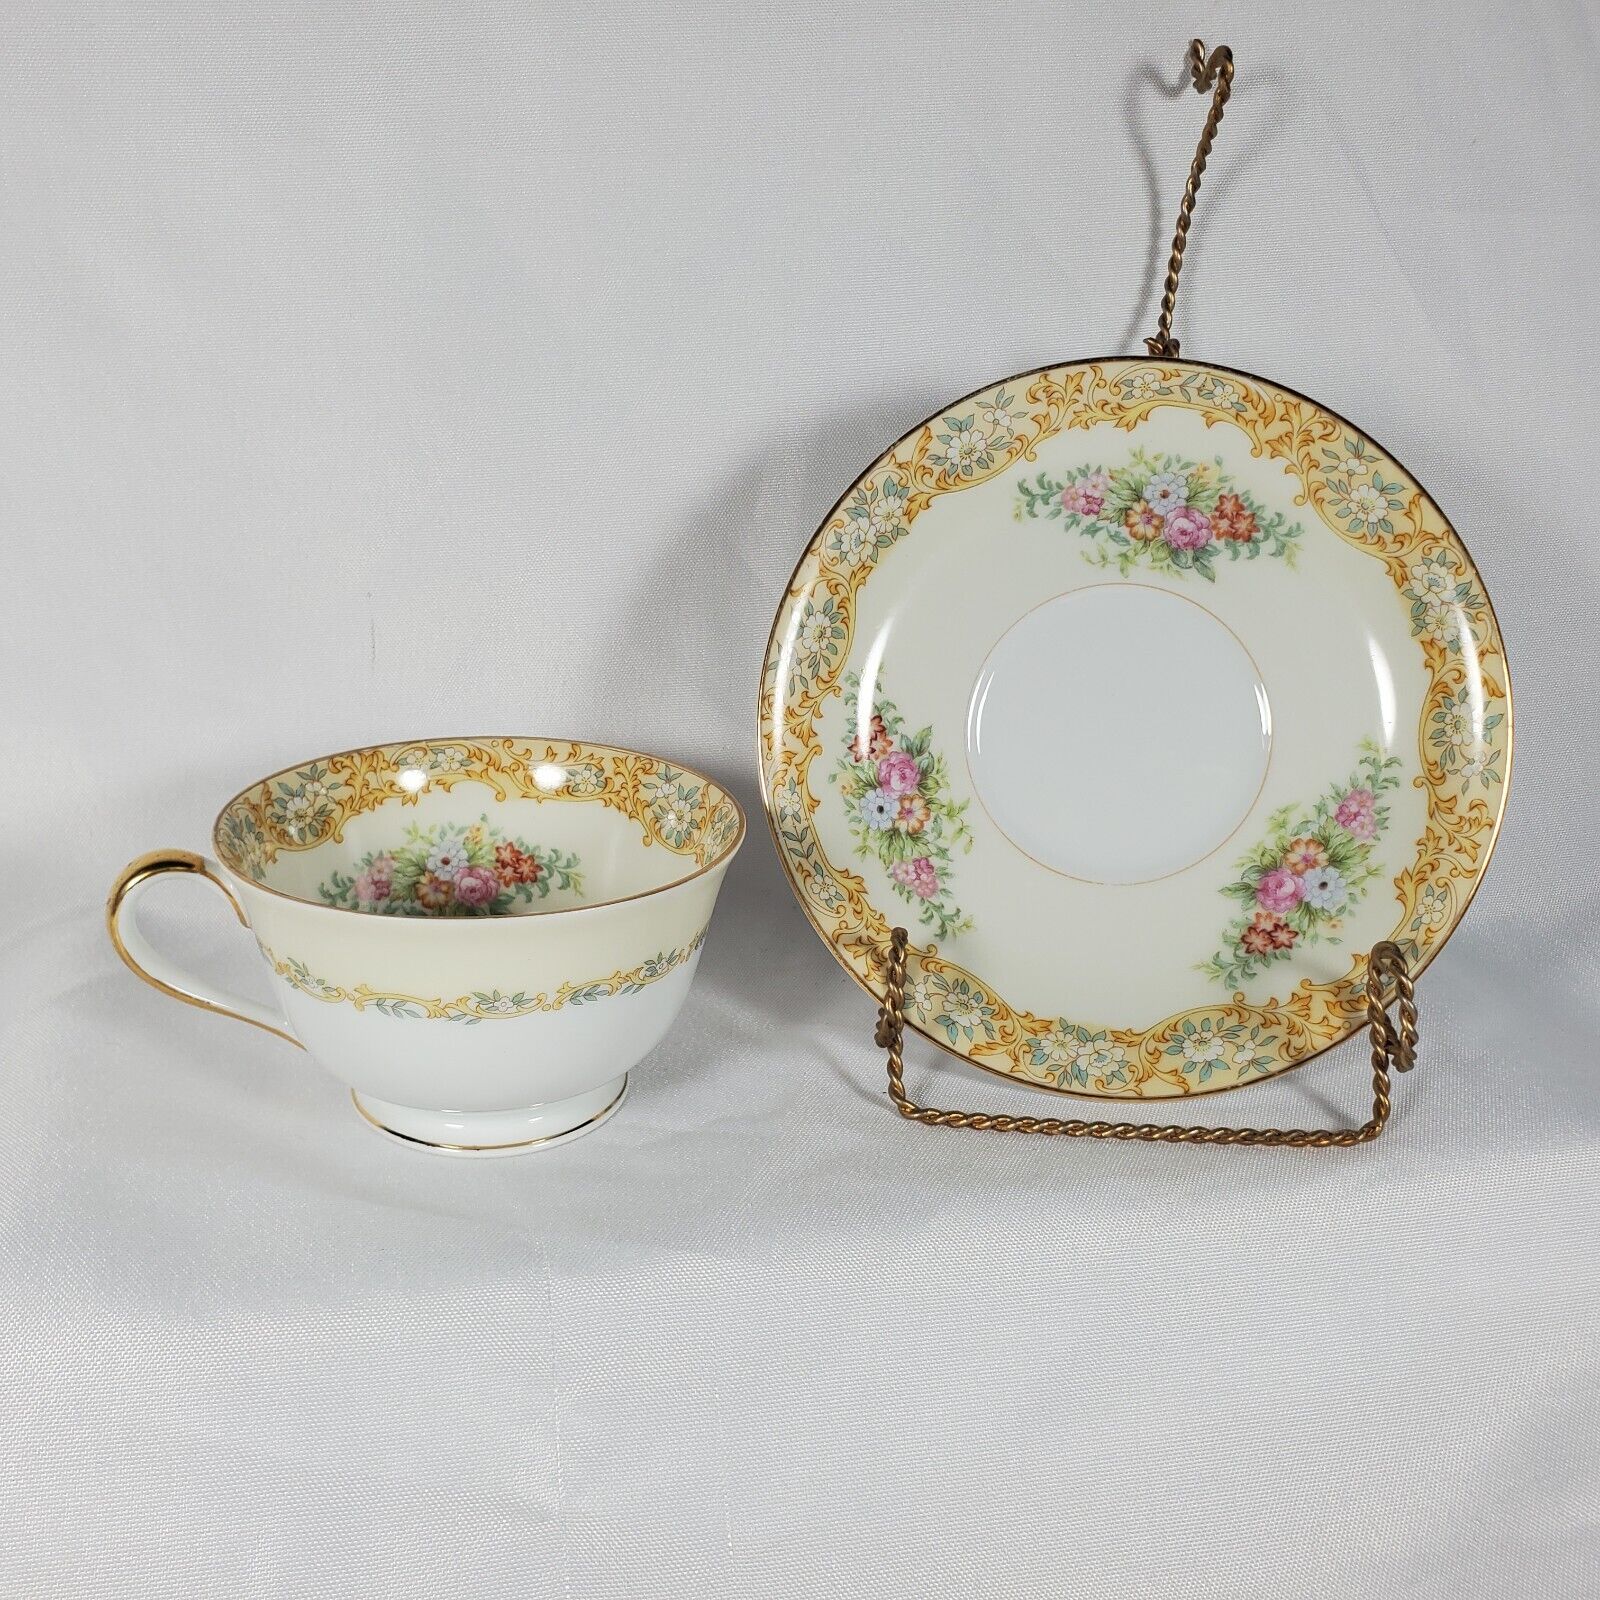 Noritake Tea Cup and Saucer Set Bone China Made in Japan Vines and Wildflowers